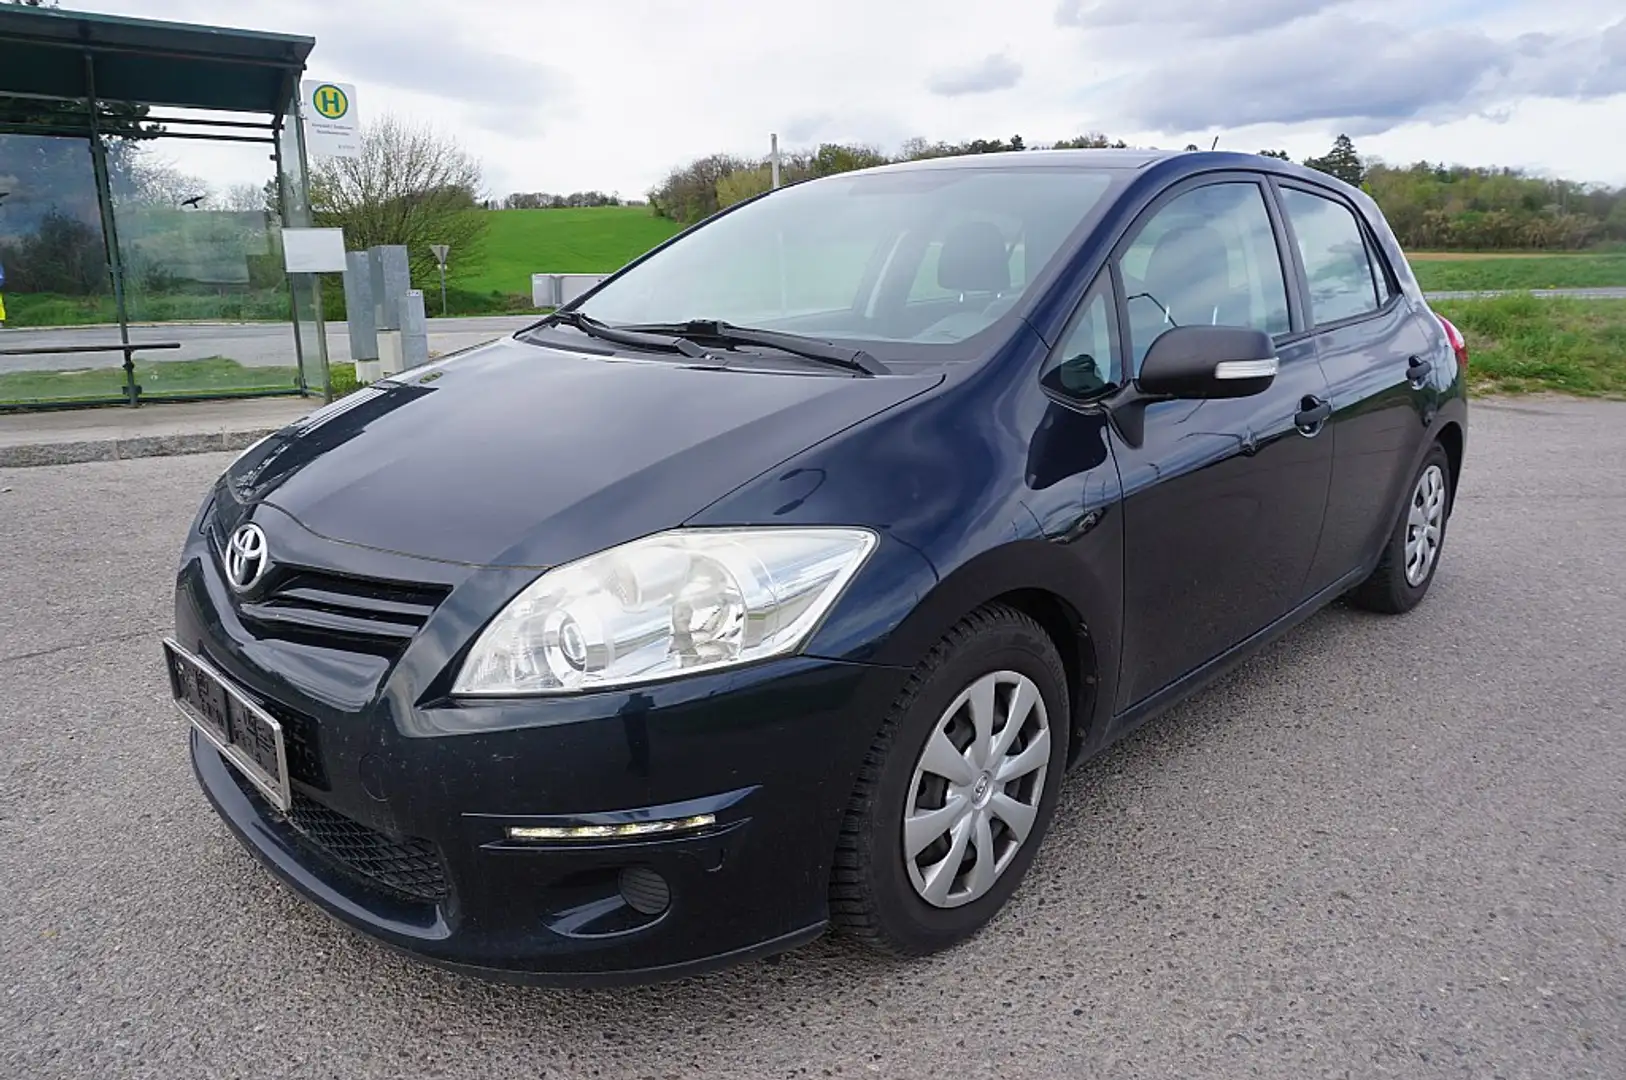 Toyota Auris 1,4 D-4D 90 DPF Young siva - 1